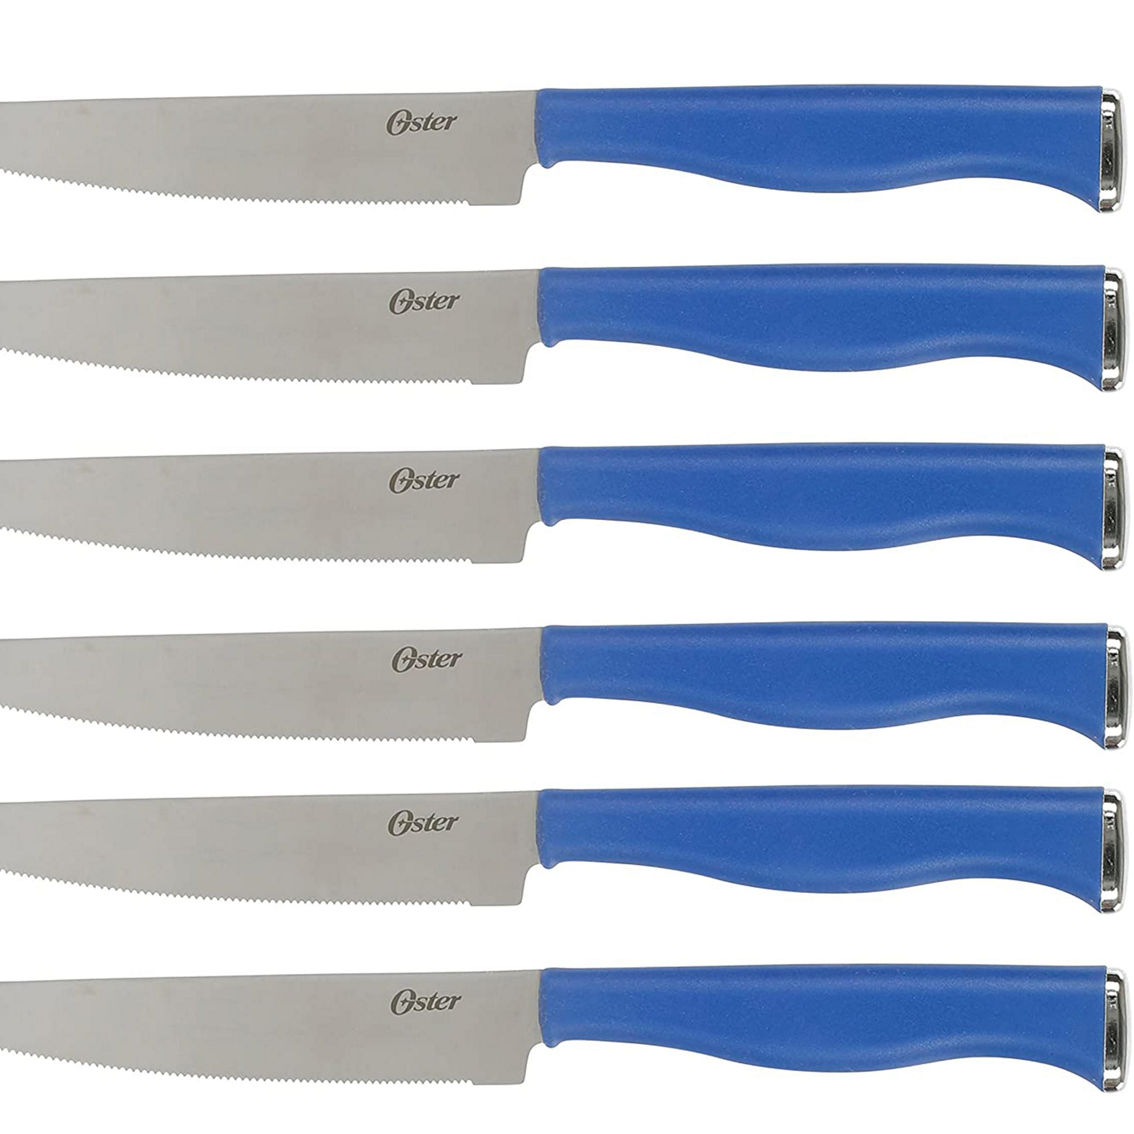 Oster Langmore 15 Piece Stainless Steel Blade Cutlery Set in Dark Blue - Image 4 of 5